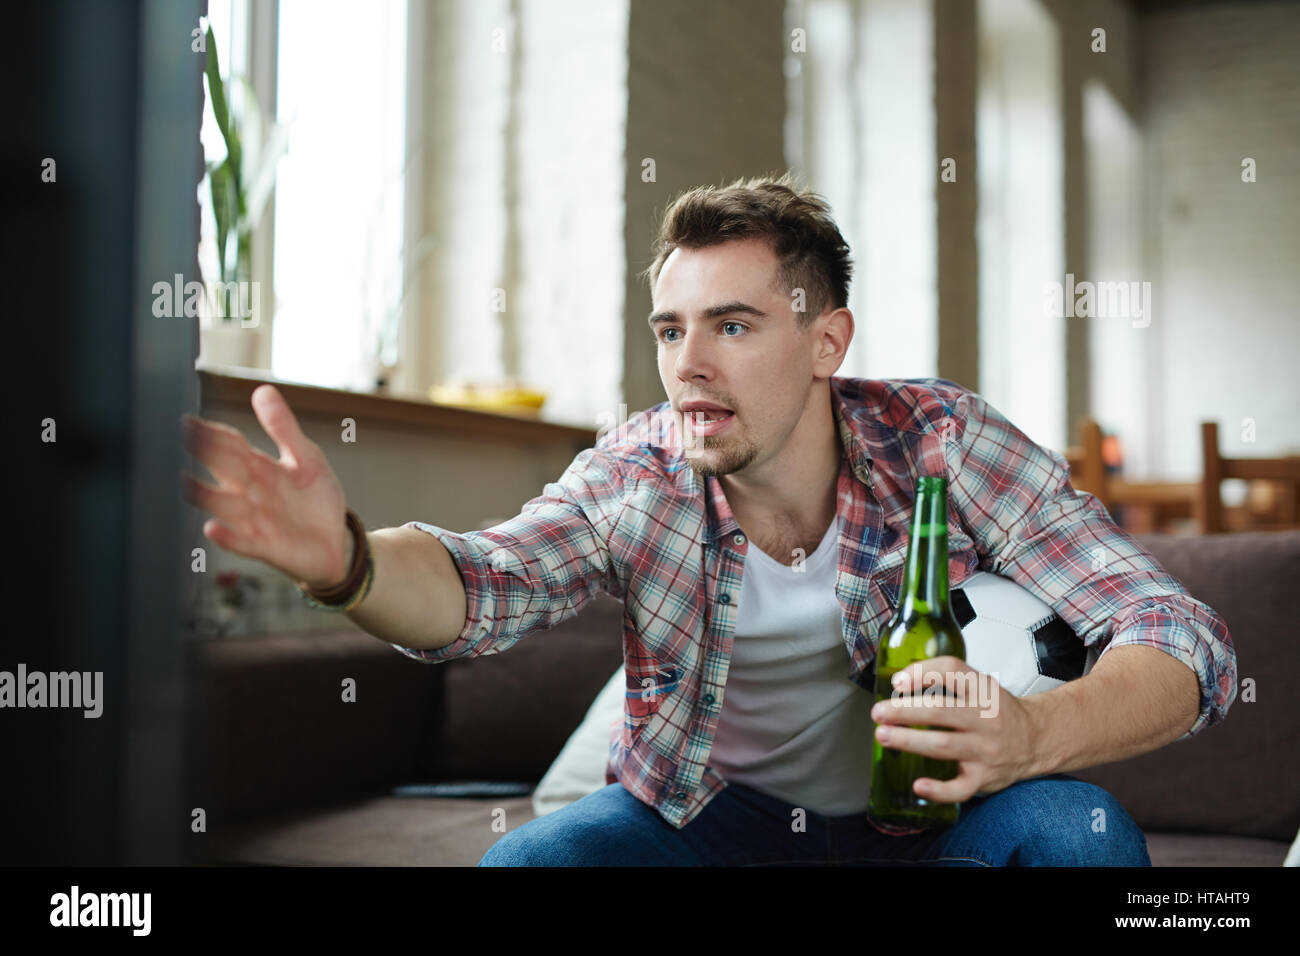 Football fan being nervous while watching broadcast of football game Stock Photo